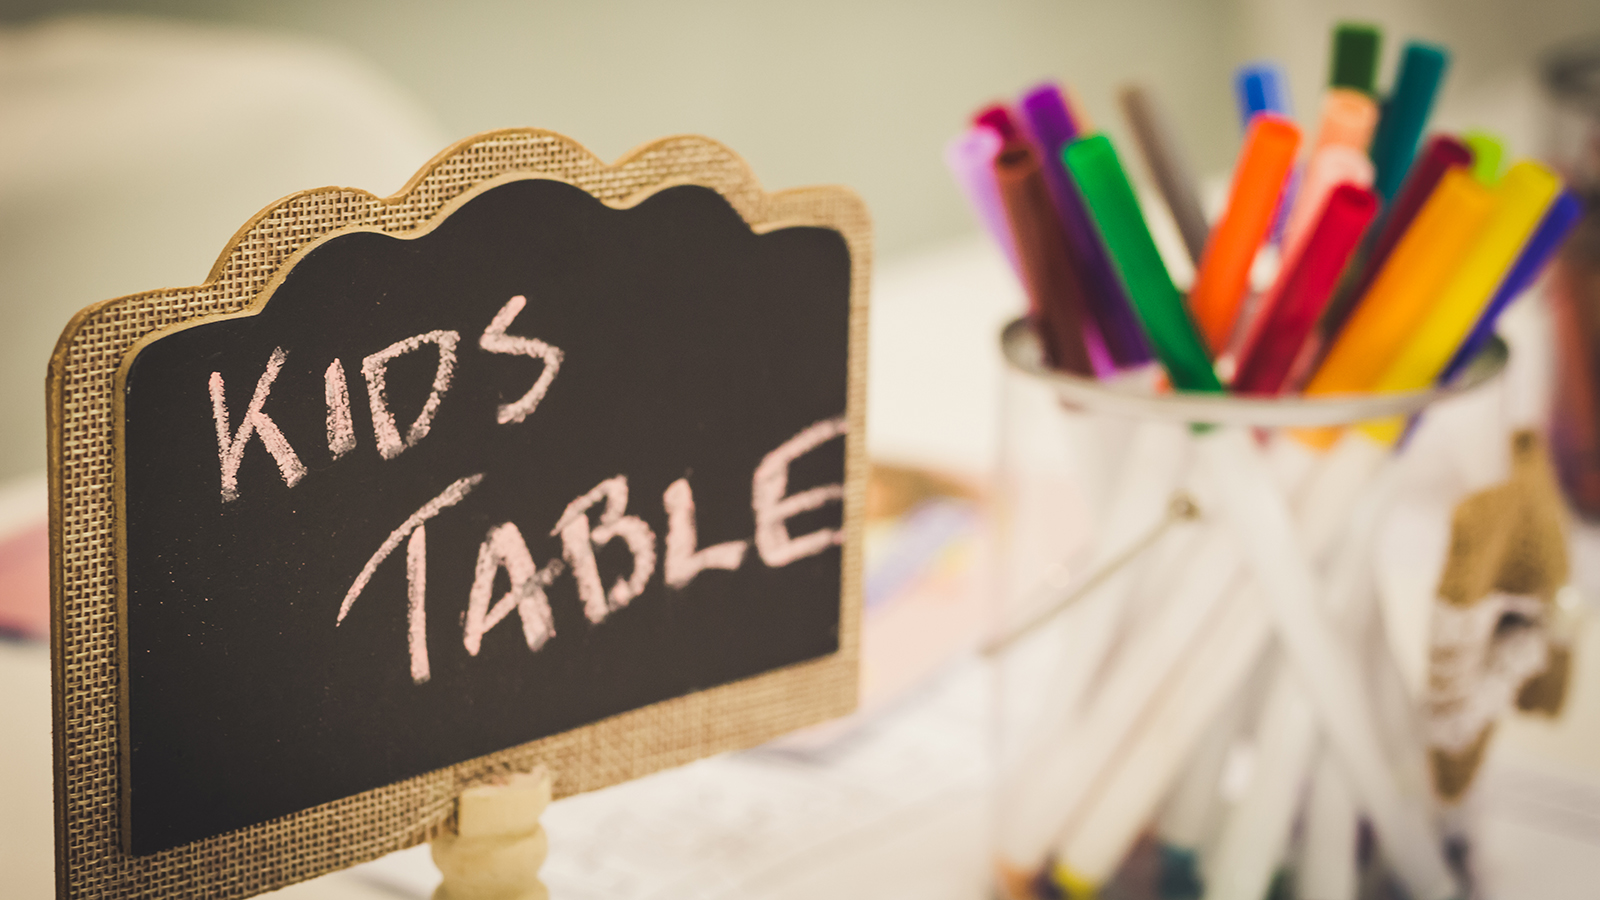 Kids entertainment table at a wedding with colorful markers in a jar and a chalkboard sign